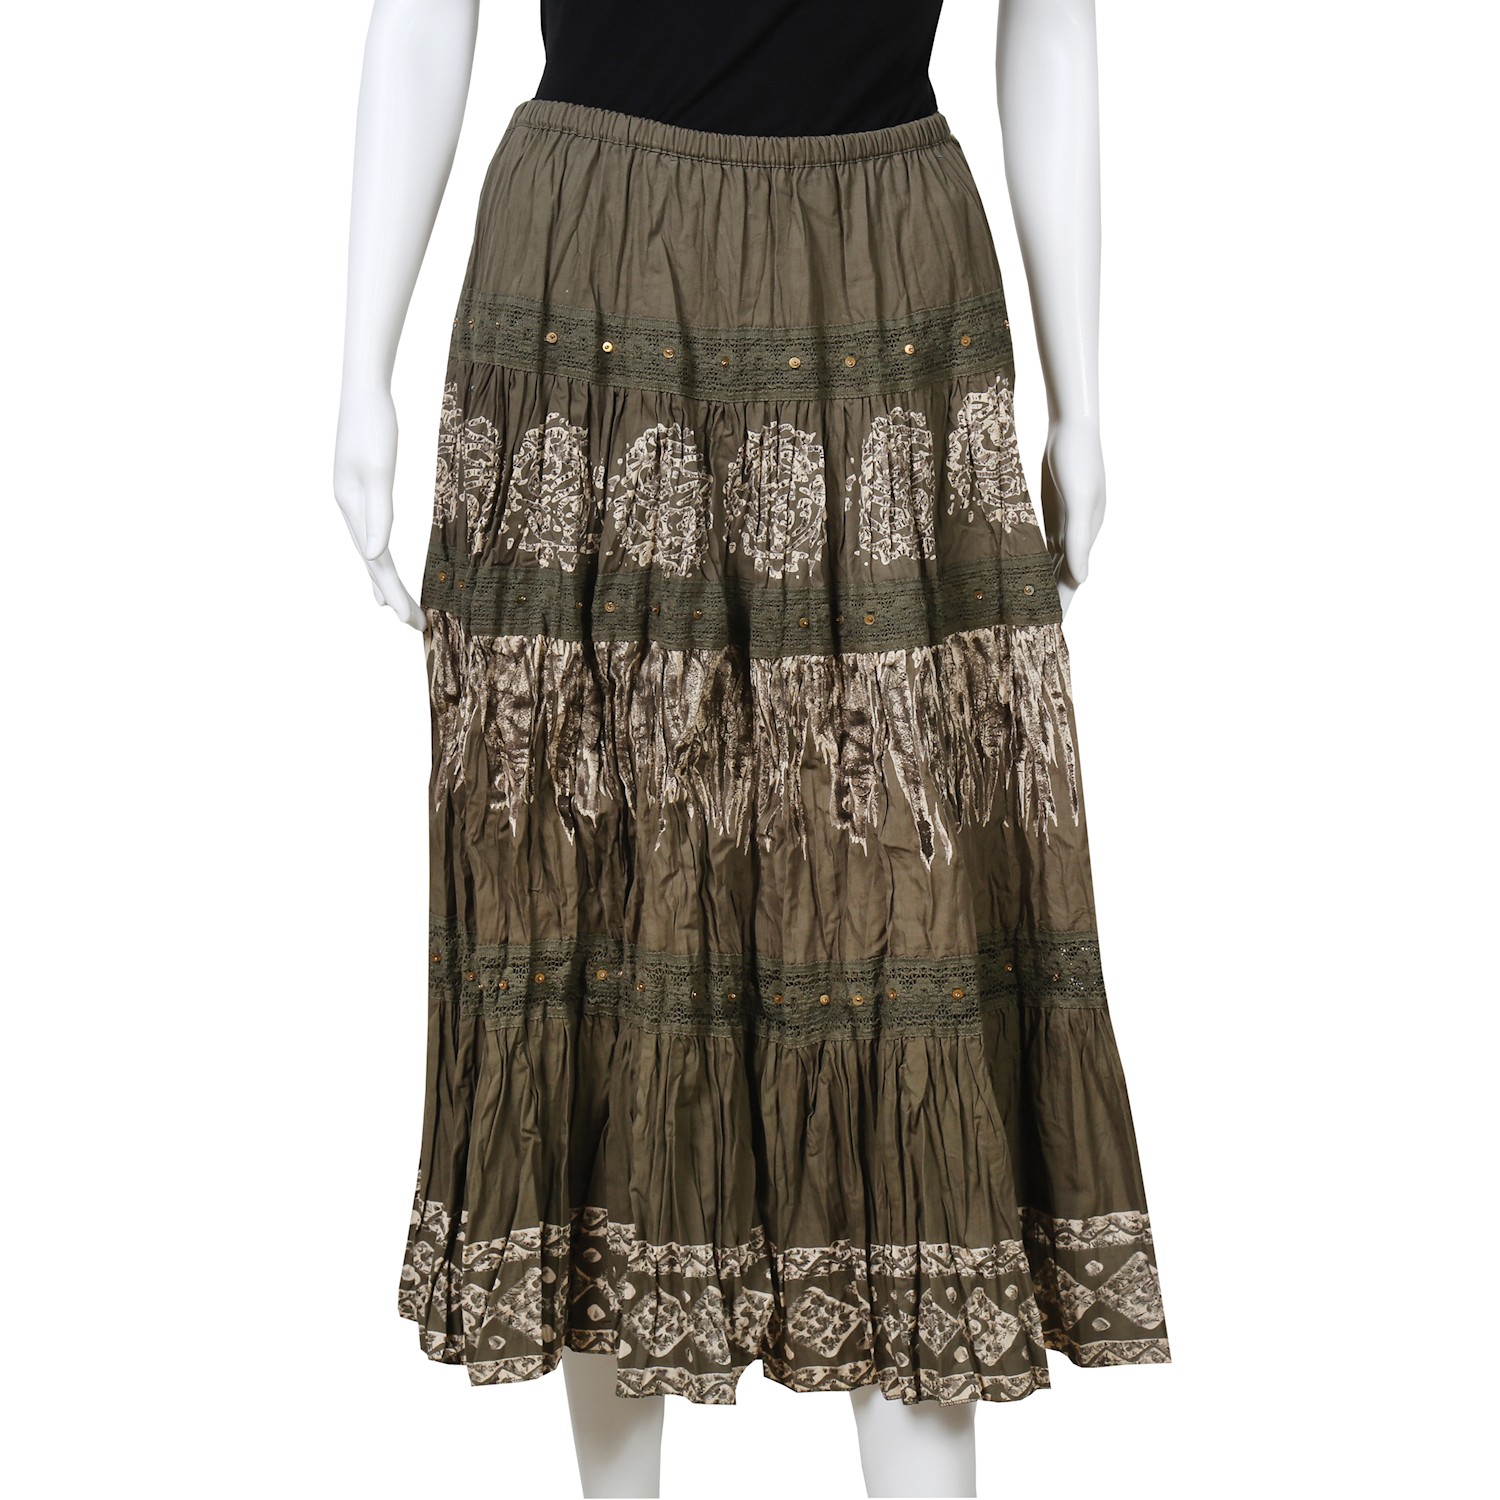 Women's Tiered Peasant Skirt - Olive Green Broomstick Maxi | Signals ...